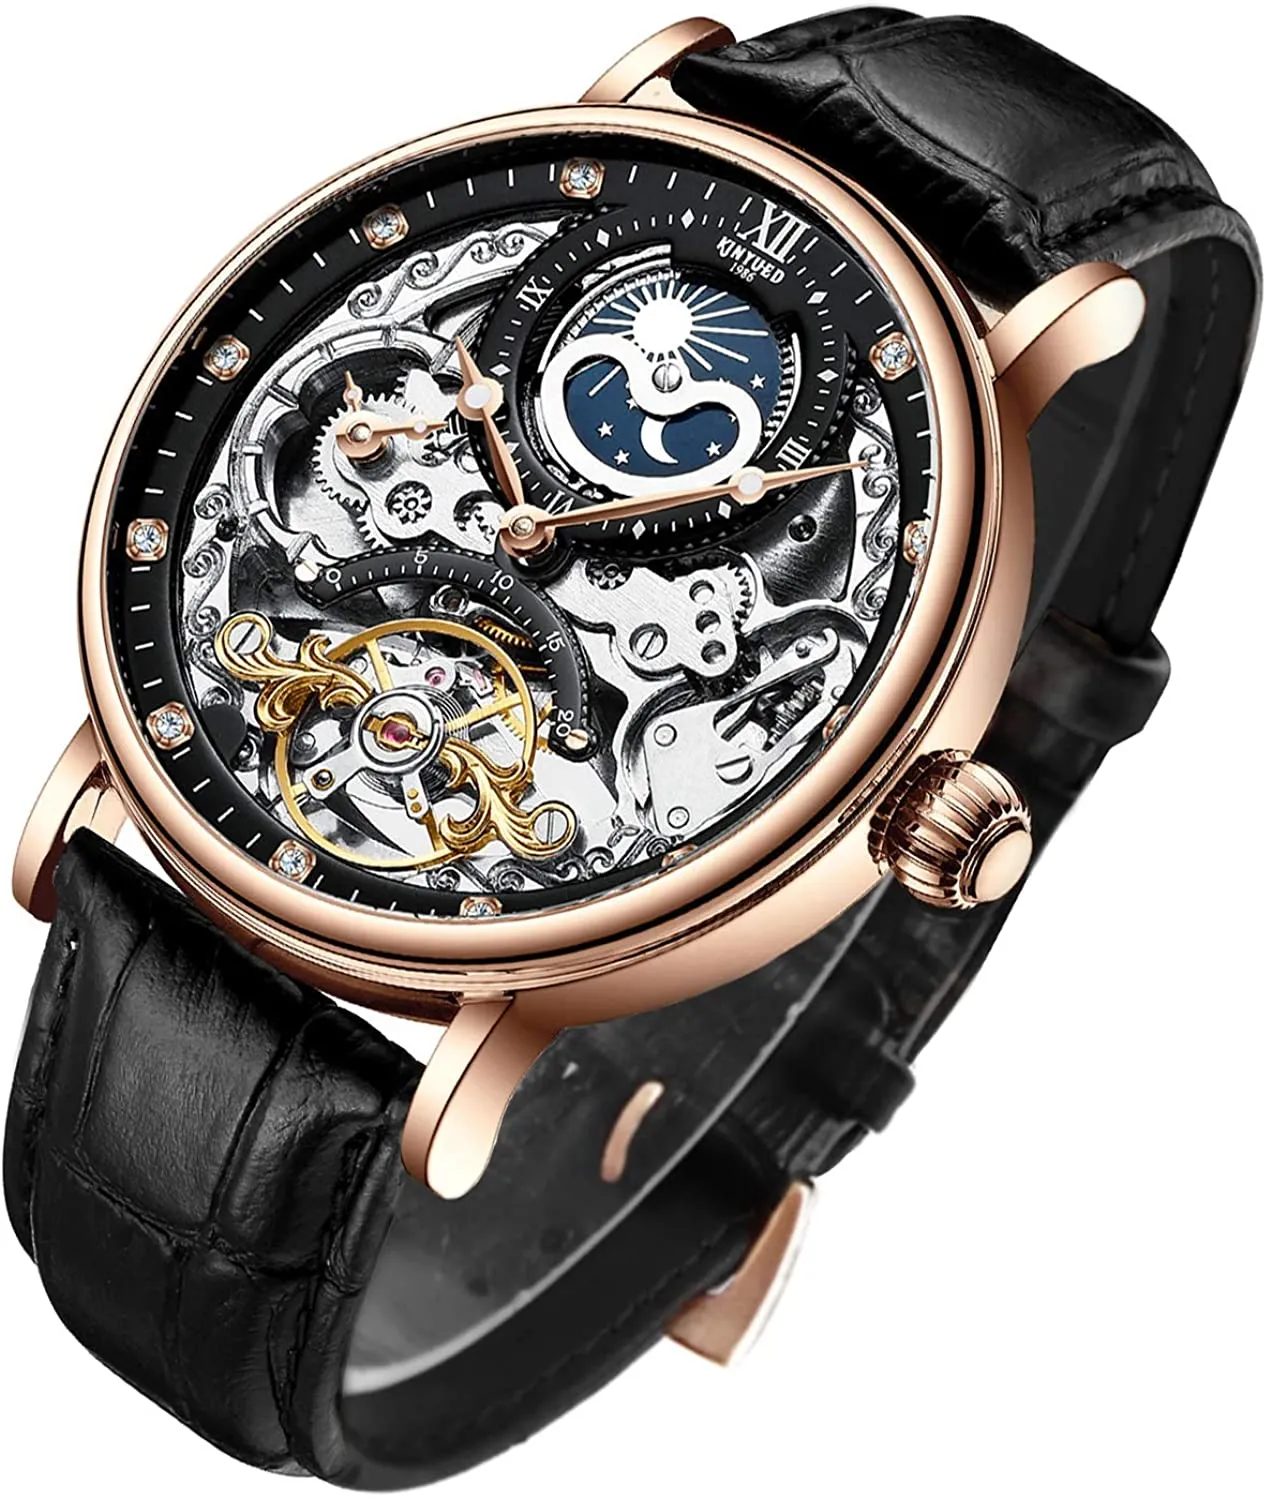 Mens Luxury Skeleton Automatic Mechanical Wrist Watches Leather Moon Frase Luminous Hands Self-Wind Wristwatch283r